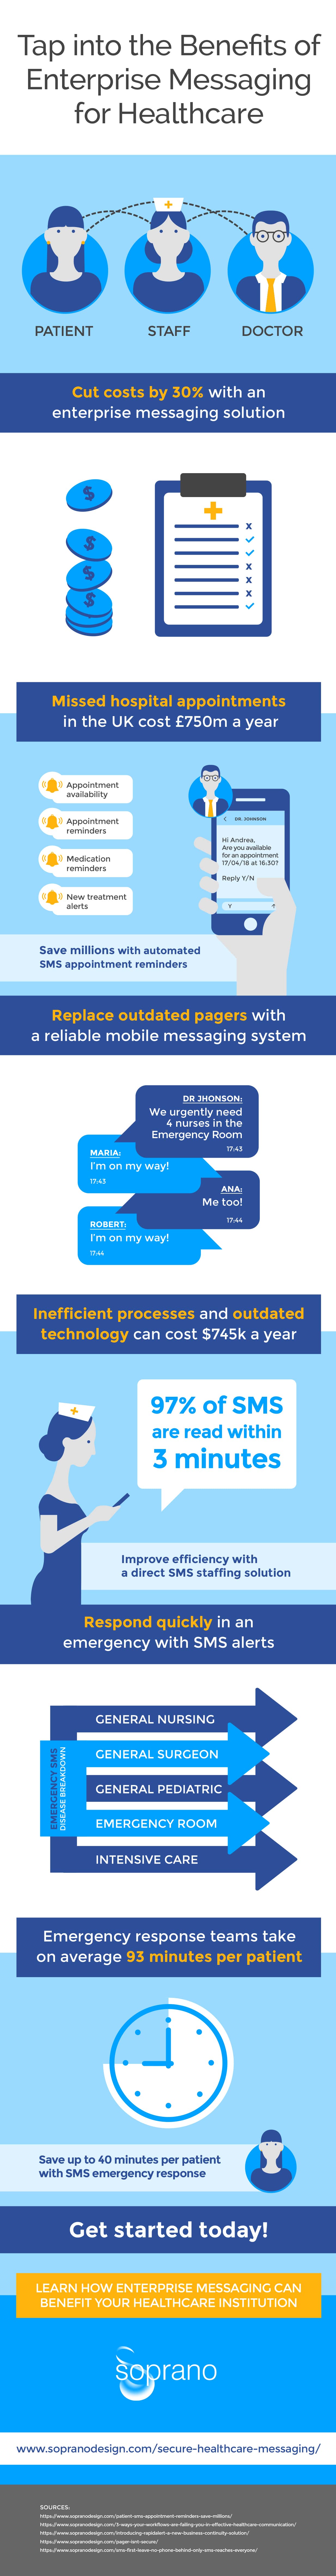 Benefits of Mobile Messaging for Healthcare